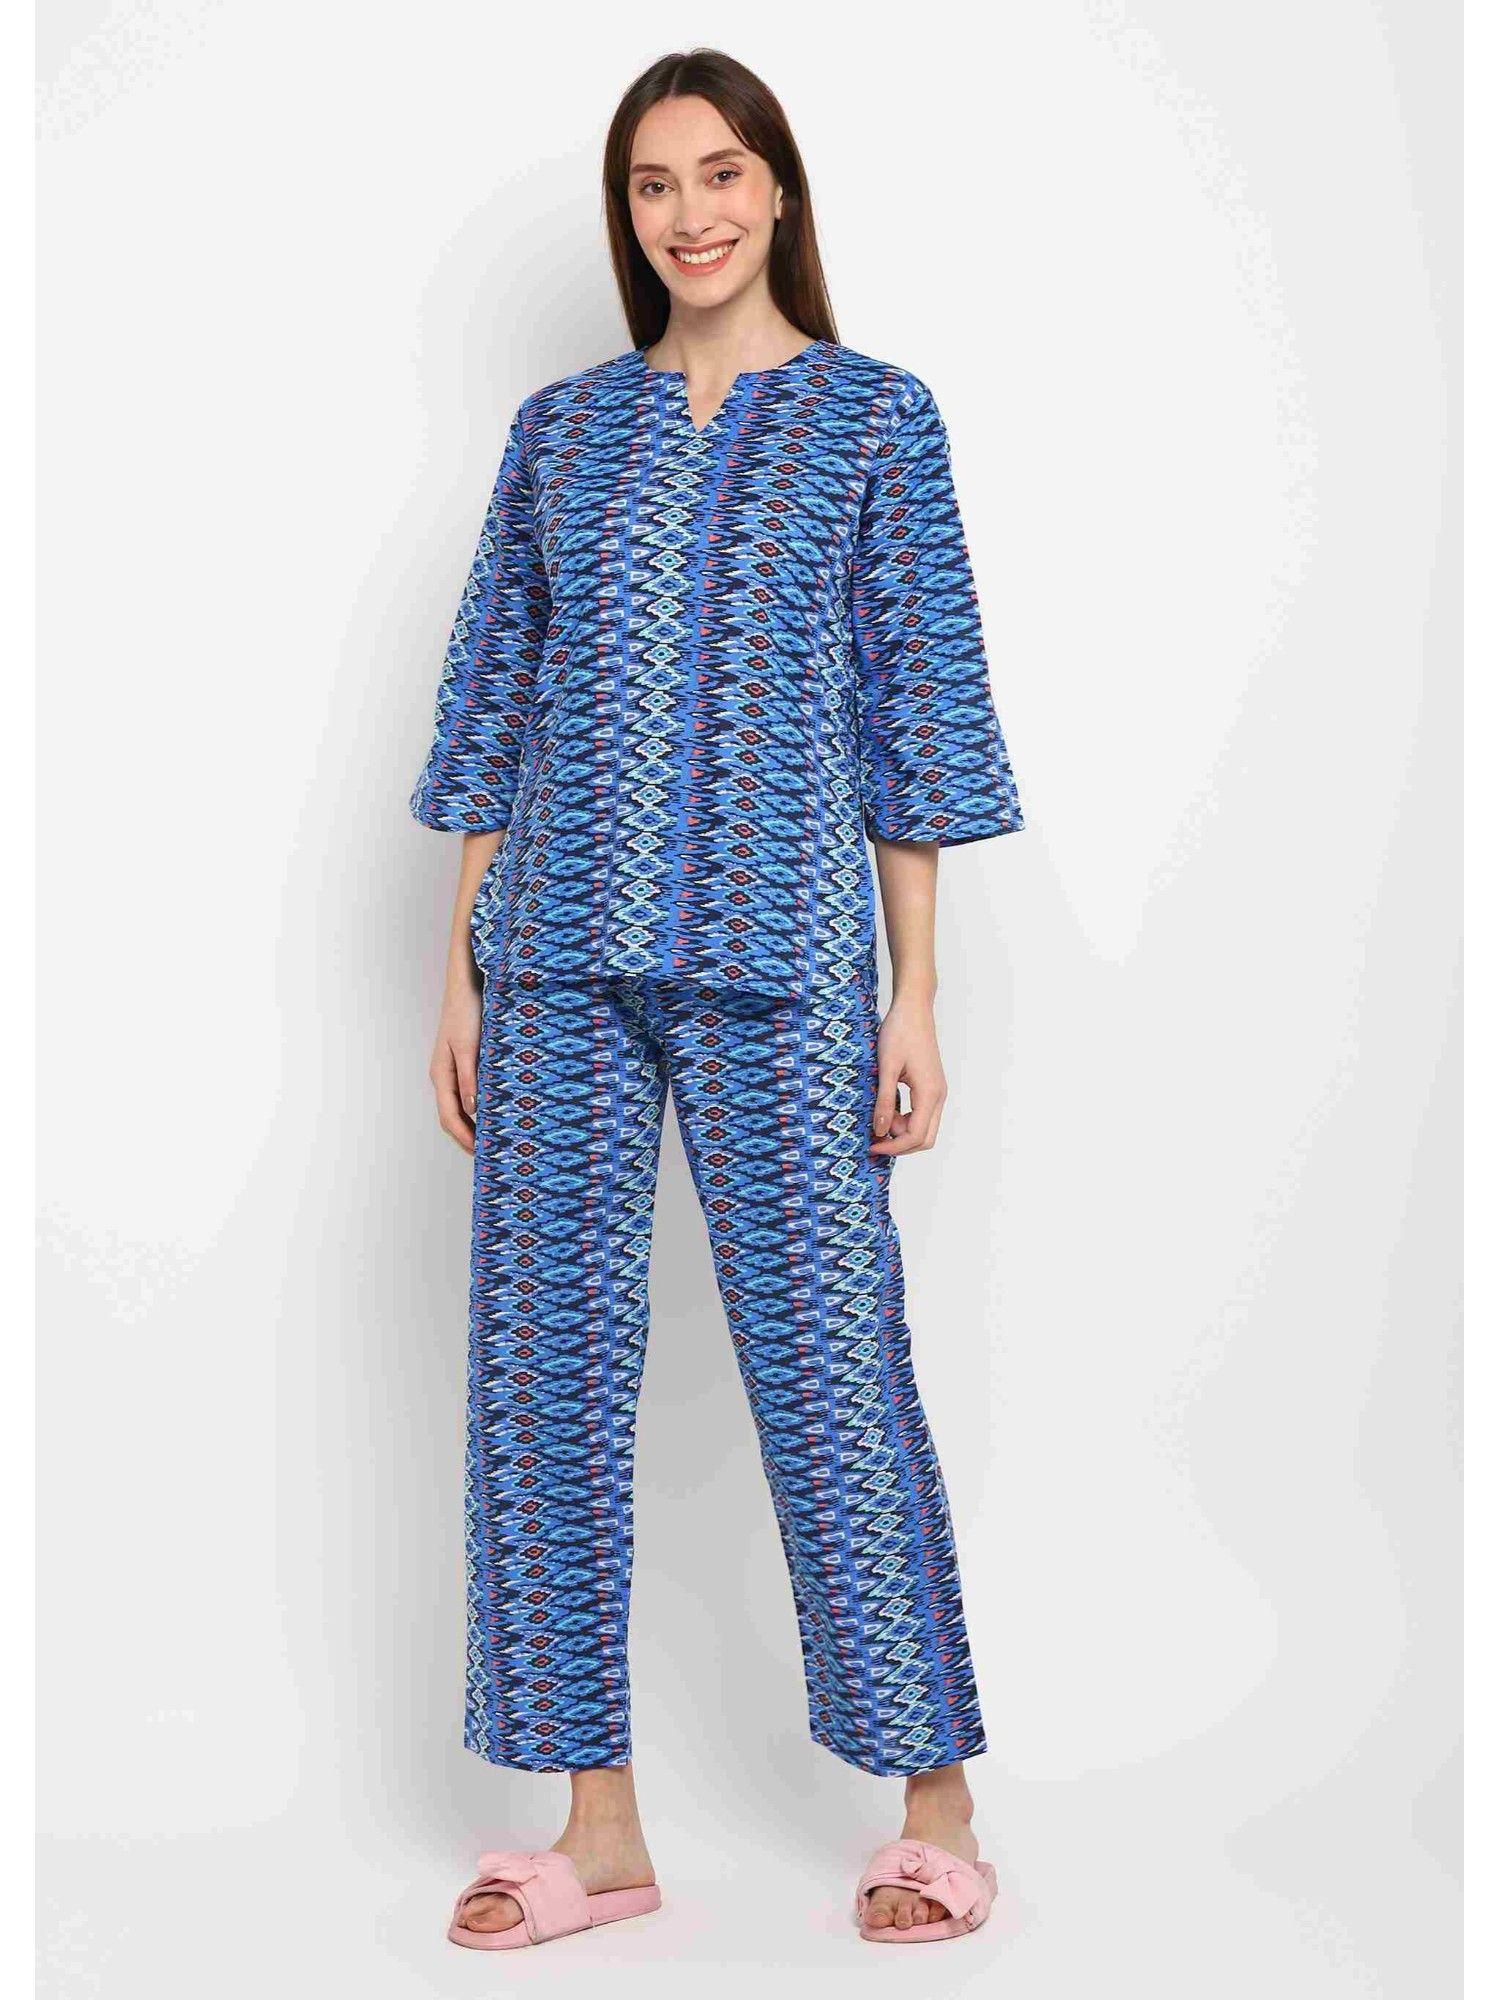 blue-abstract-print-3/4th-sleeve-womens-night-suit-(set-of-2)